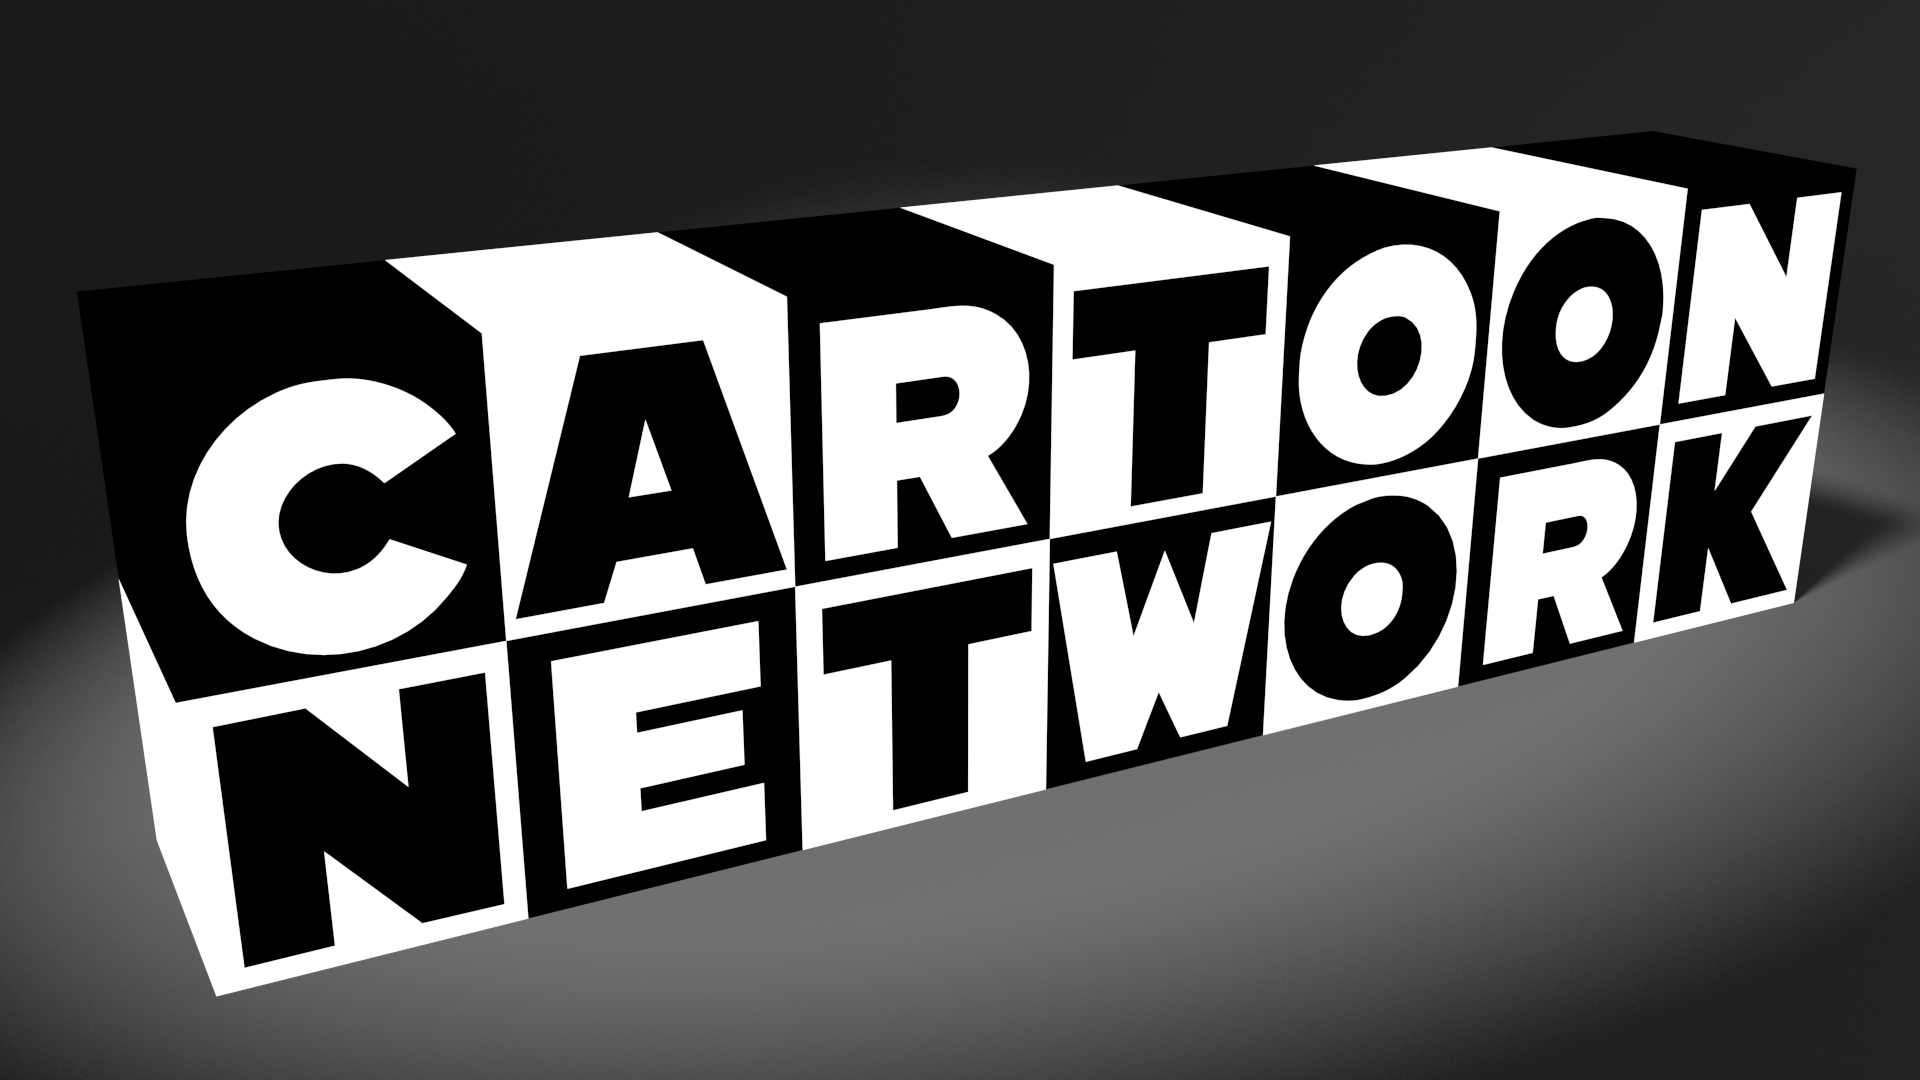 Wallpaper's Collection: «Cartoon Network Wallpapers»